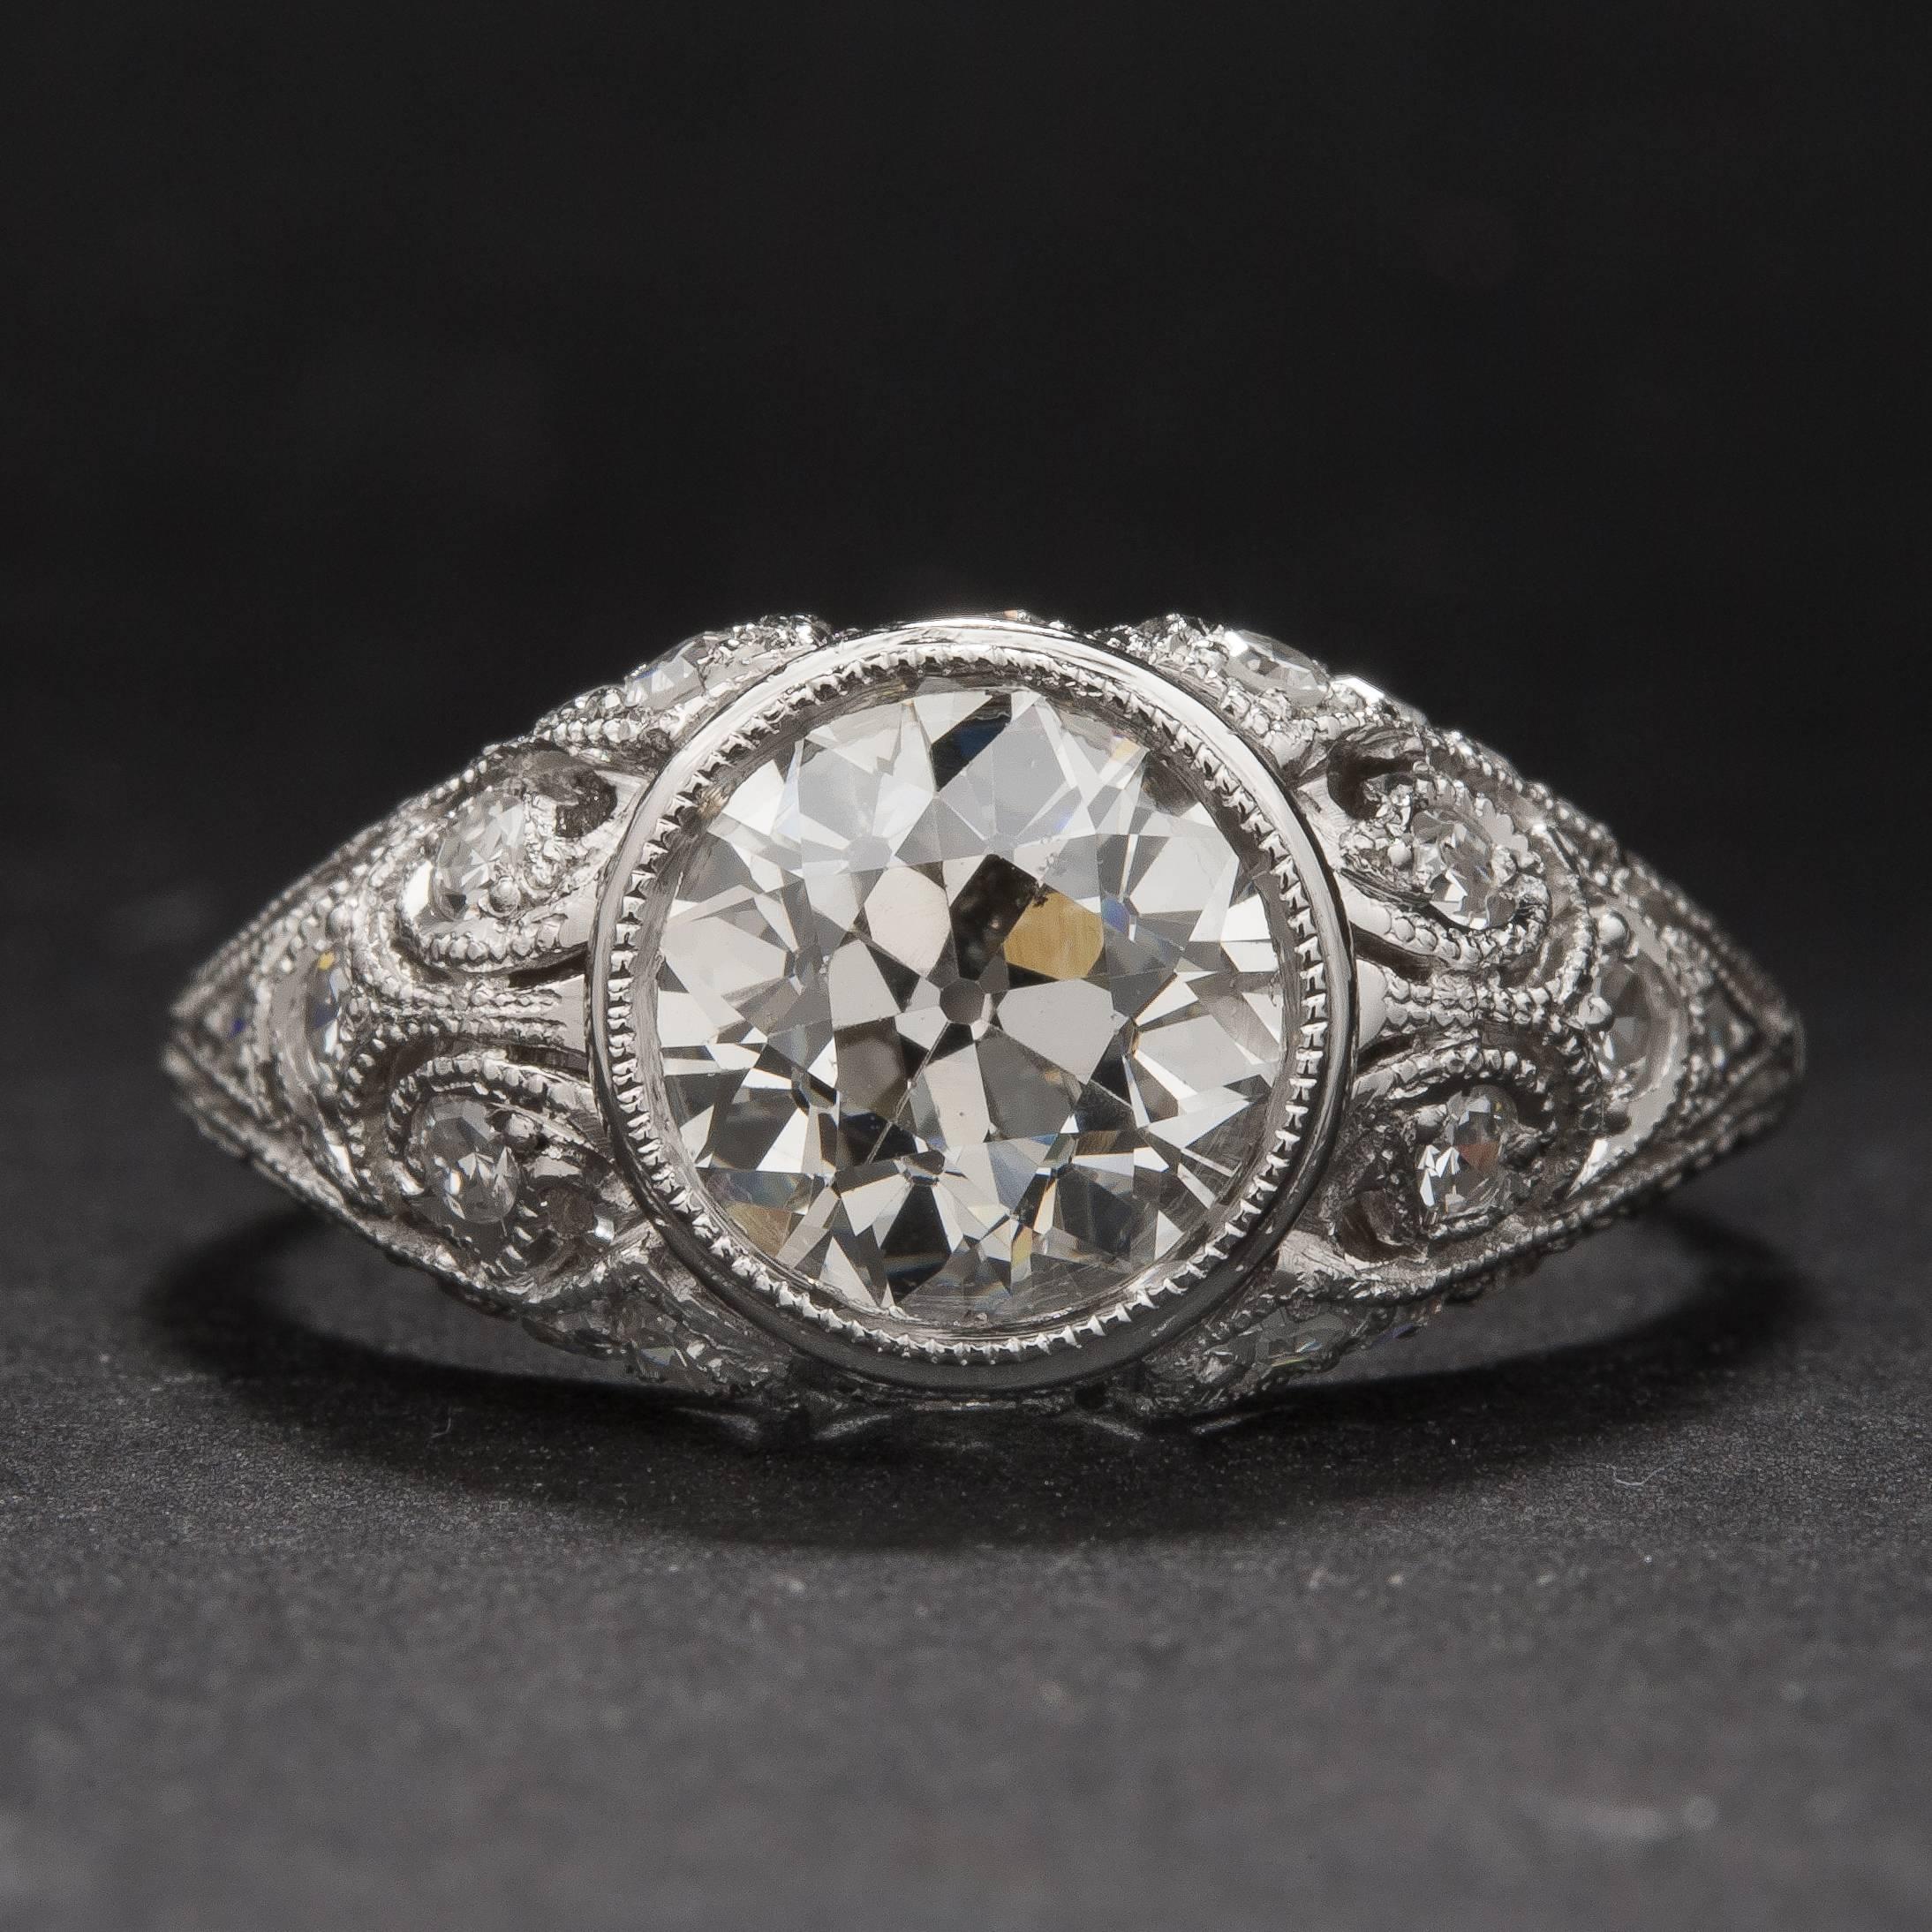 A lovely 1.52 carat diamond sits at the center of this intricately designed Art Deco style platinum mounting. The center diamond is estimated I color, VS2 clarity and it is accented by .37 total carats of side diamonds. This ring is currently size